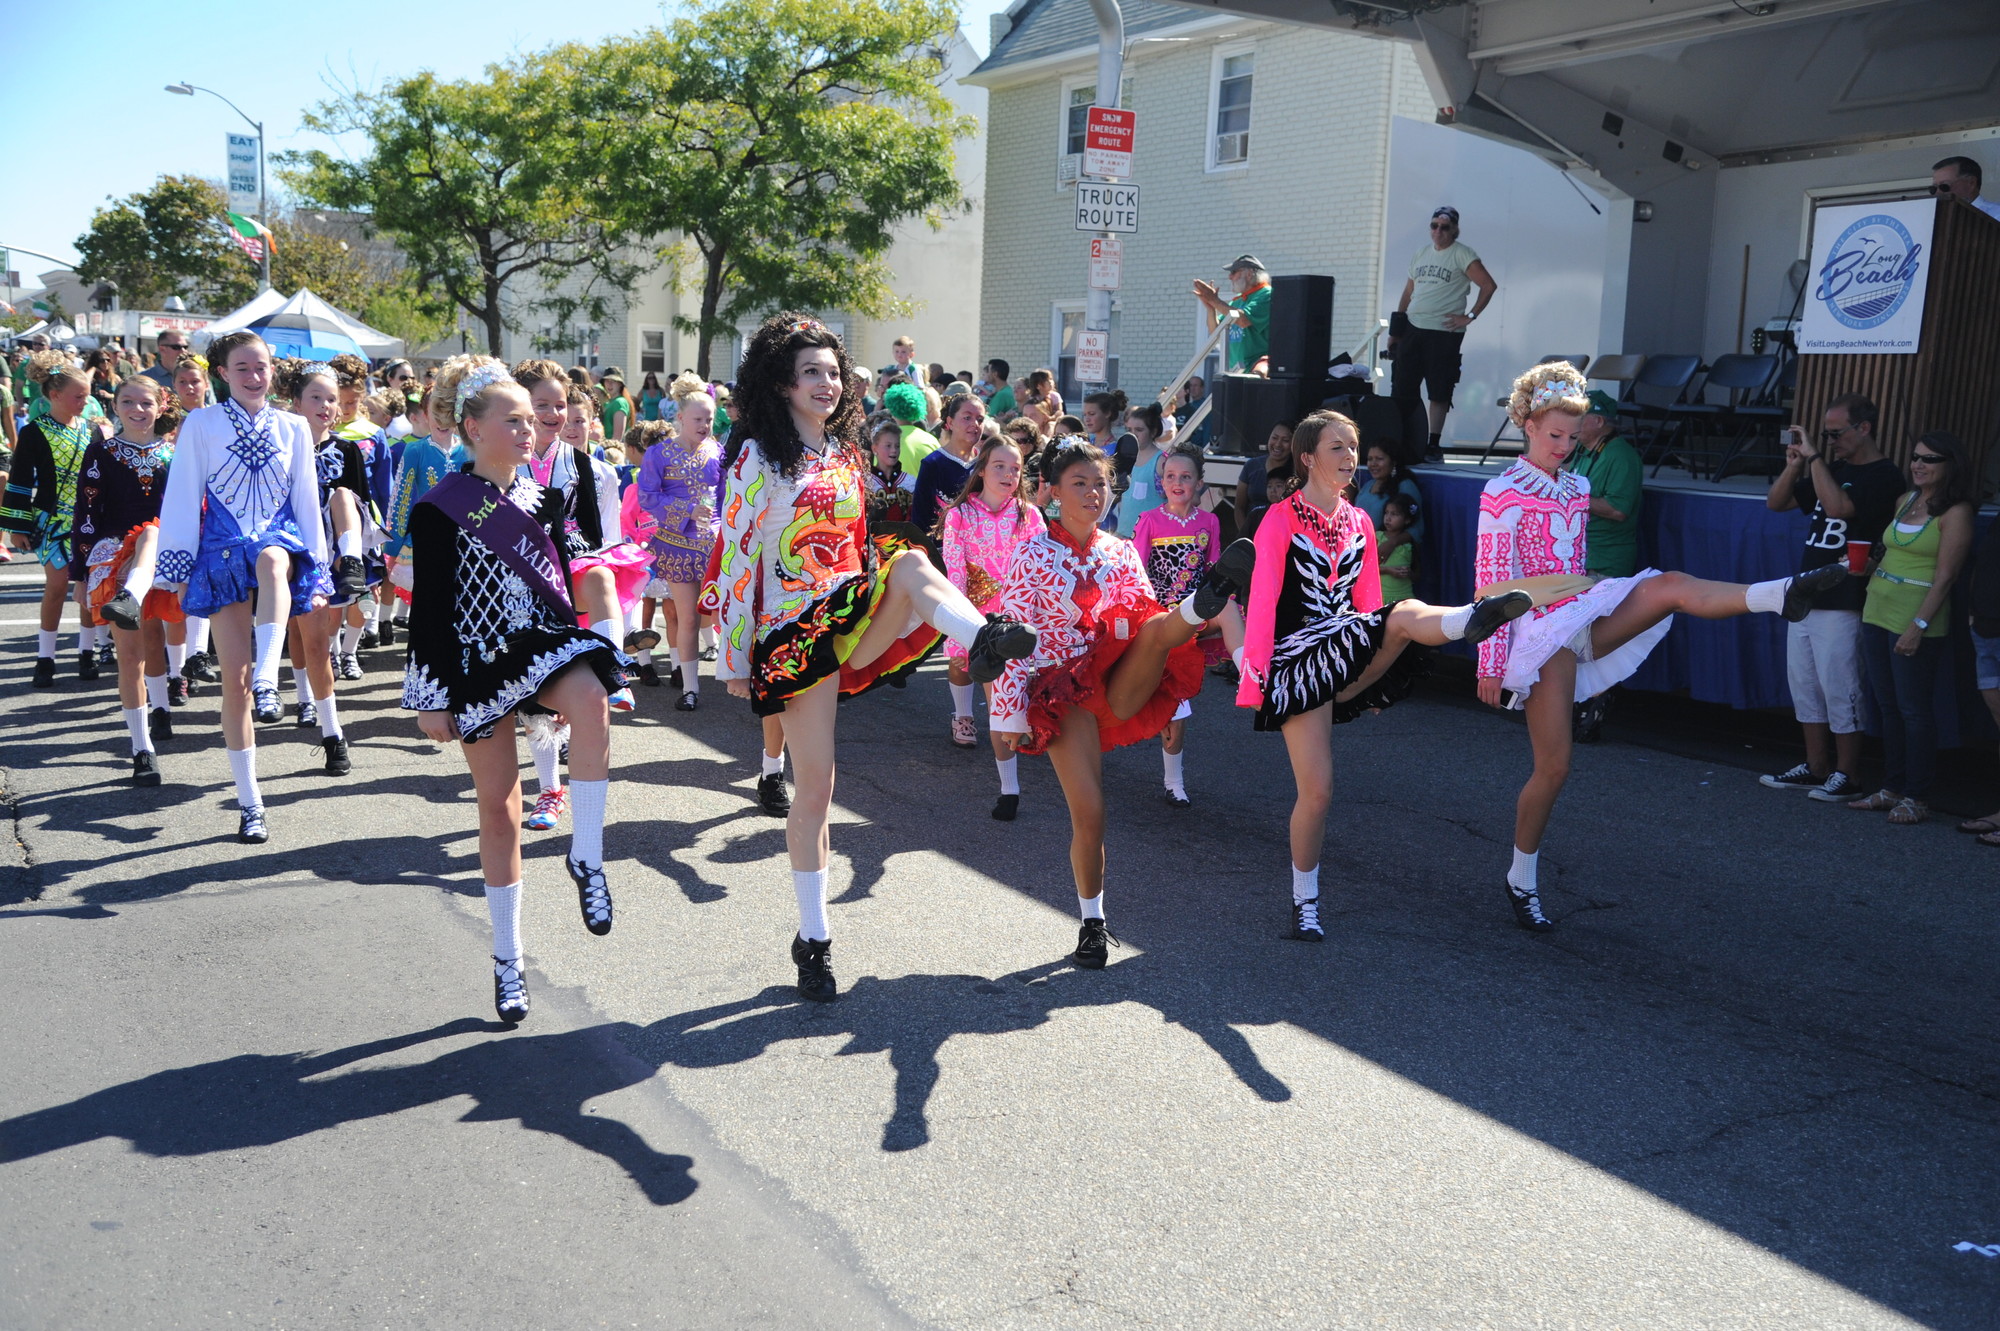 Dancers from the Hagen School of Irish Dance, above, were among the groups that marched in the 25th annual Saint Brendan the Navigator Long Beach Irish Day Parade and Festival, organized by the Ancient Order of Hibernians Division 17, last Saturday.